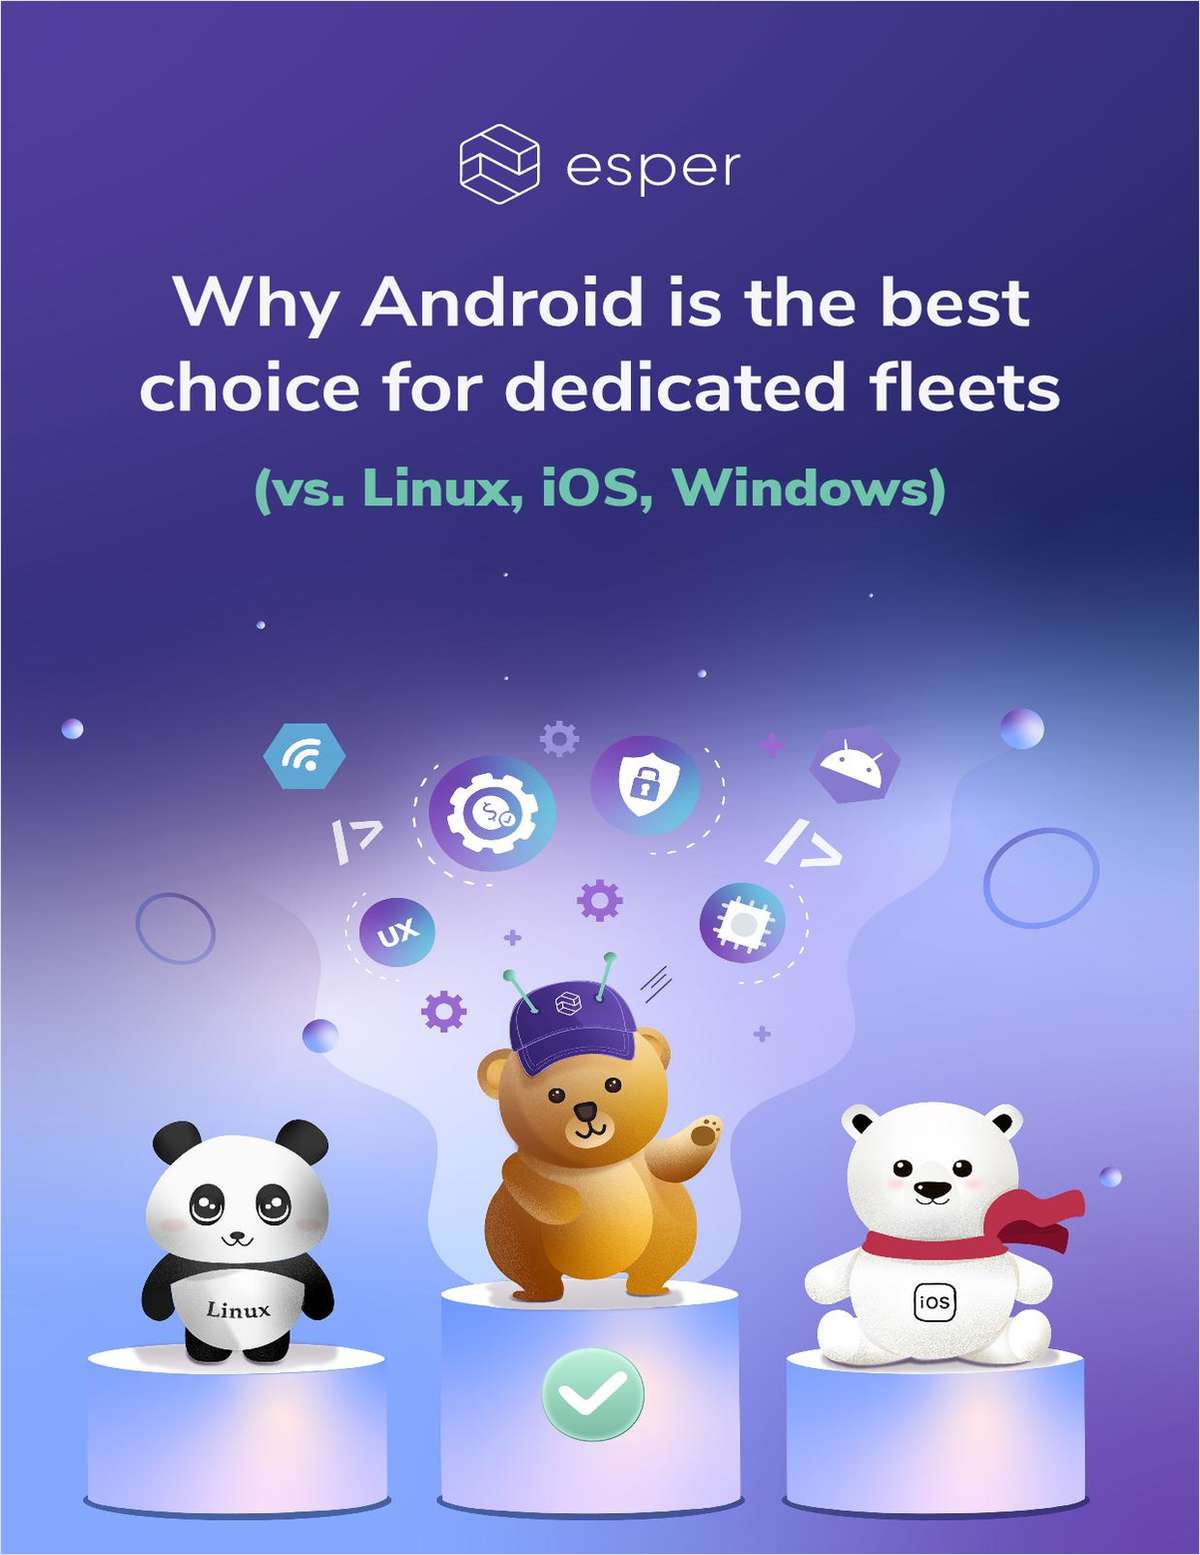 Why Android is the best choice for dedicated fleets (vs. Linux, iOS, Windows)